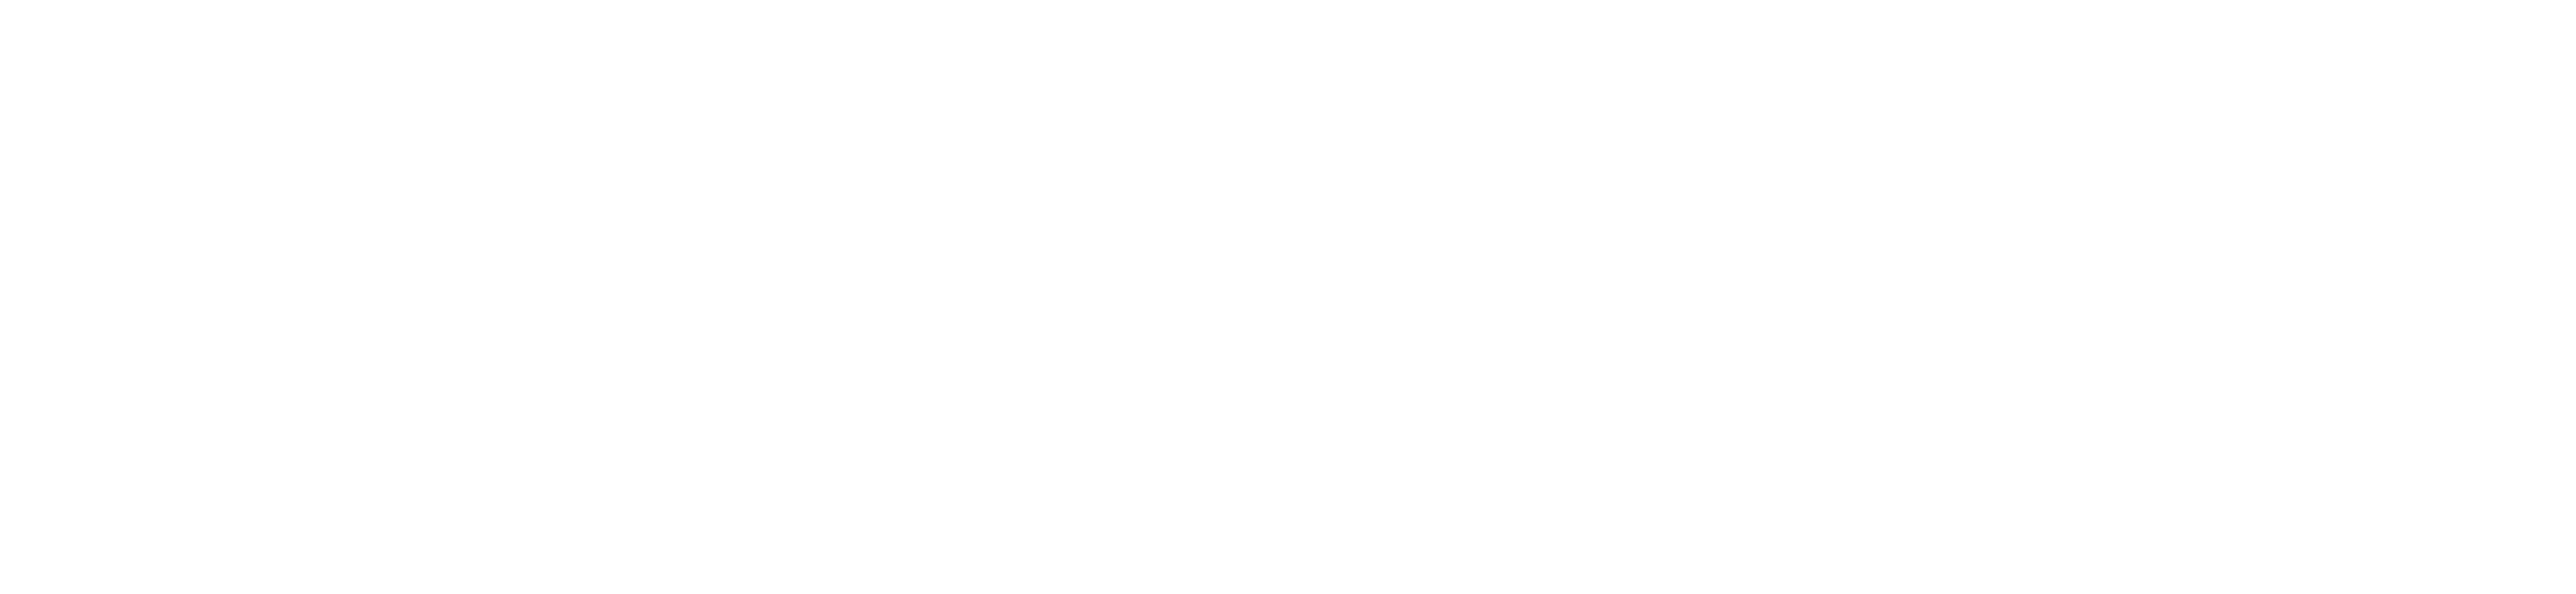 The Killer Is One of Thirteen